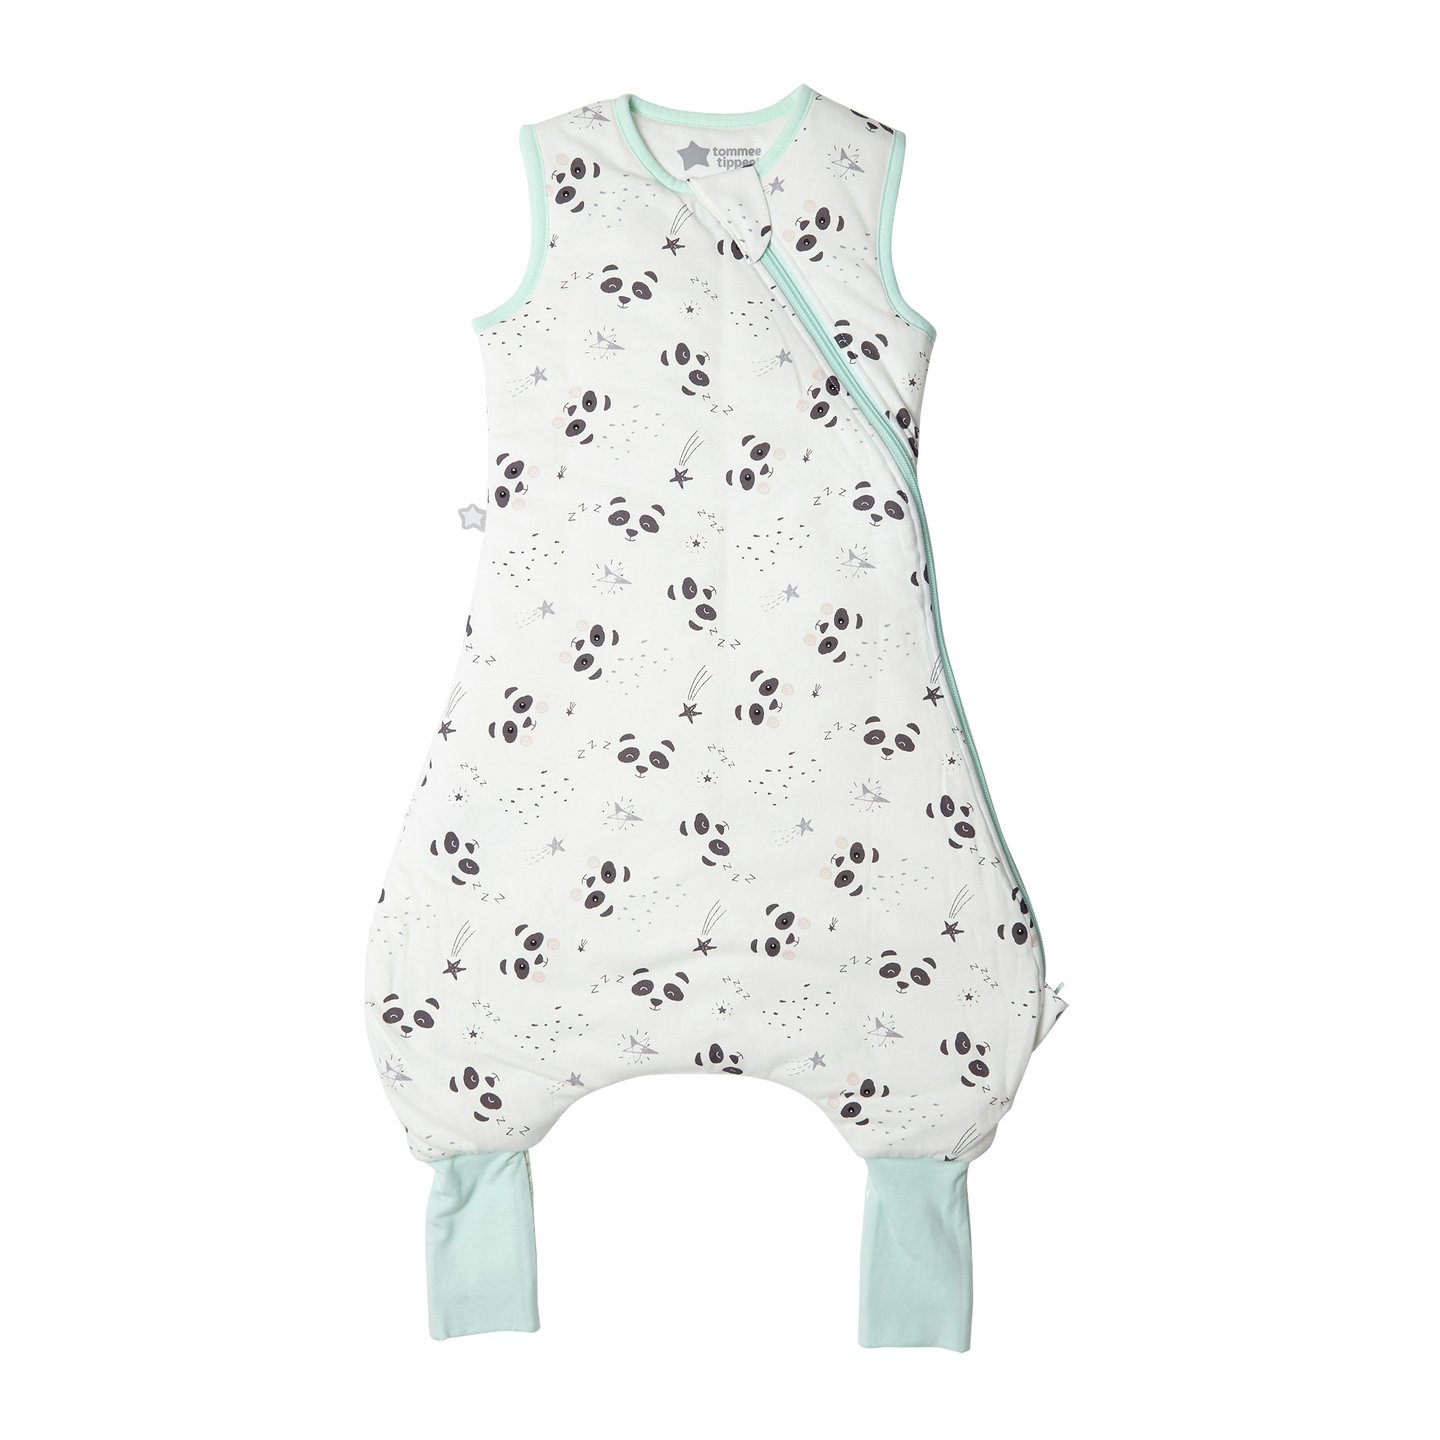 Tommee Tippee Steppee Baby Romper 18-36m, 2.5 Tog Little Pip Review